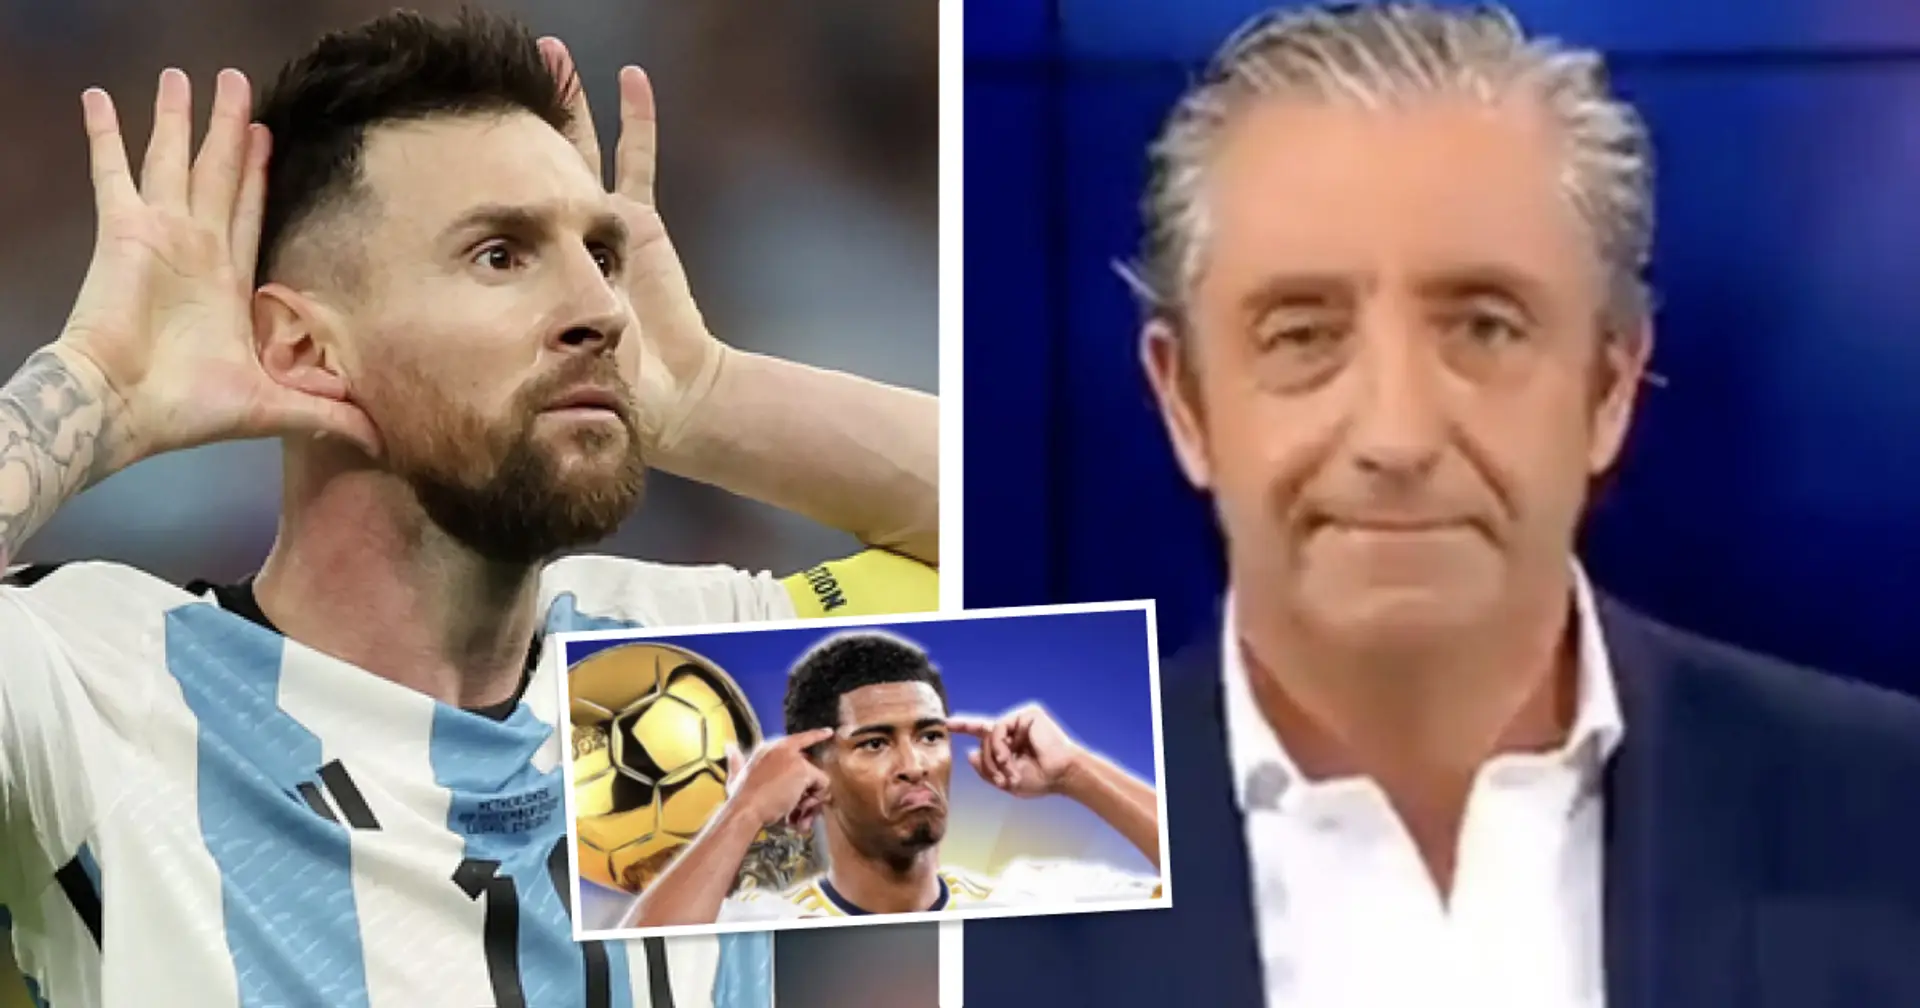 'Nobody remembers the World Cup anymore': Pro-Madrid journo wants Bellingham to win Ballon d'Or